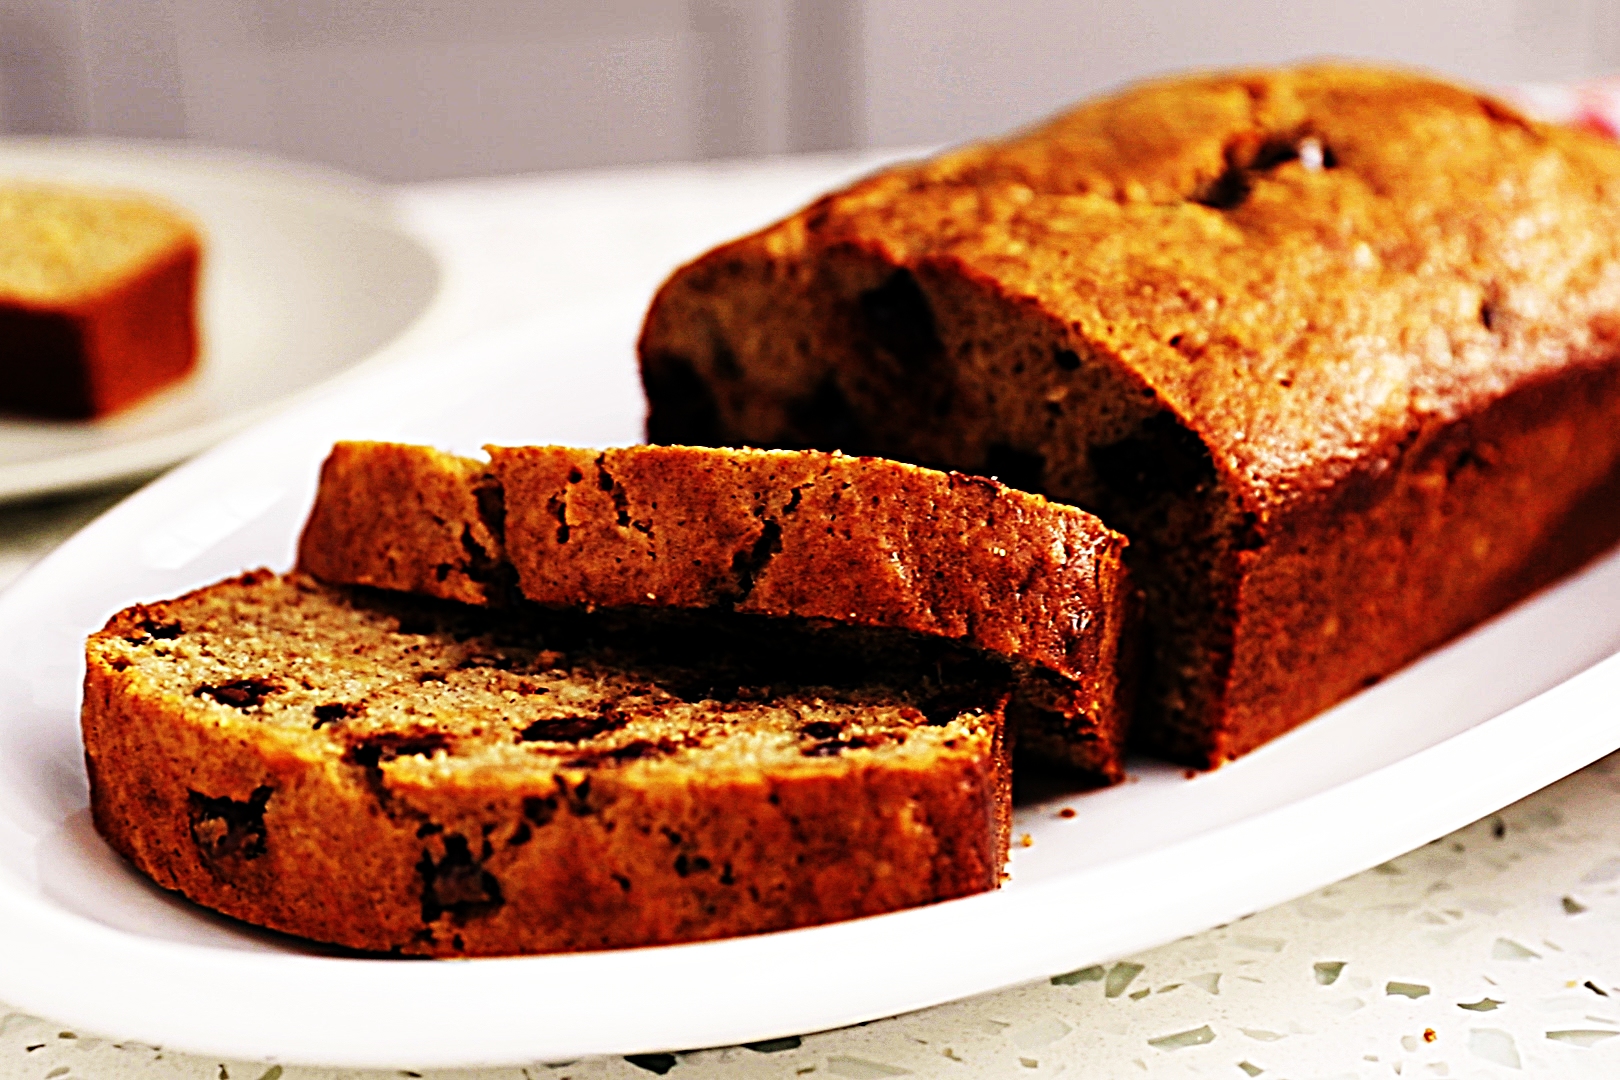 Stupid-Easy Recipe for Banana Chocolate Chip Bread (#1 Top-Rated)